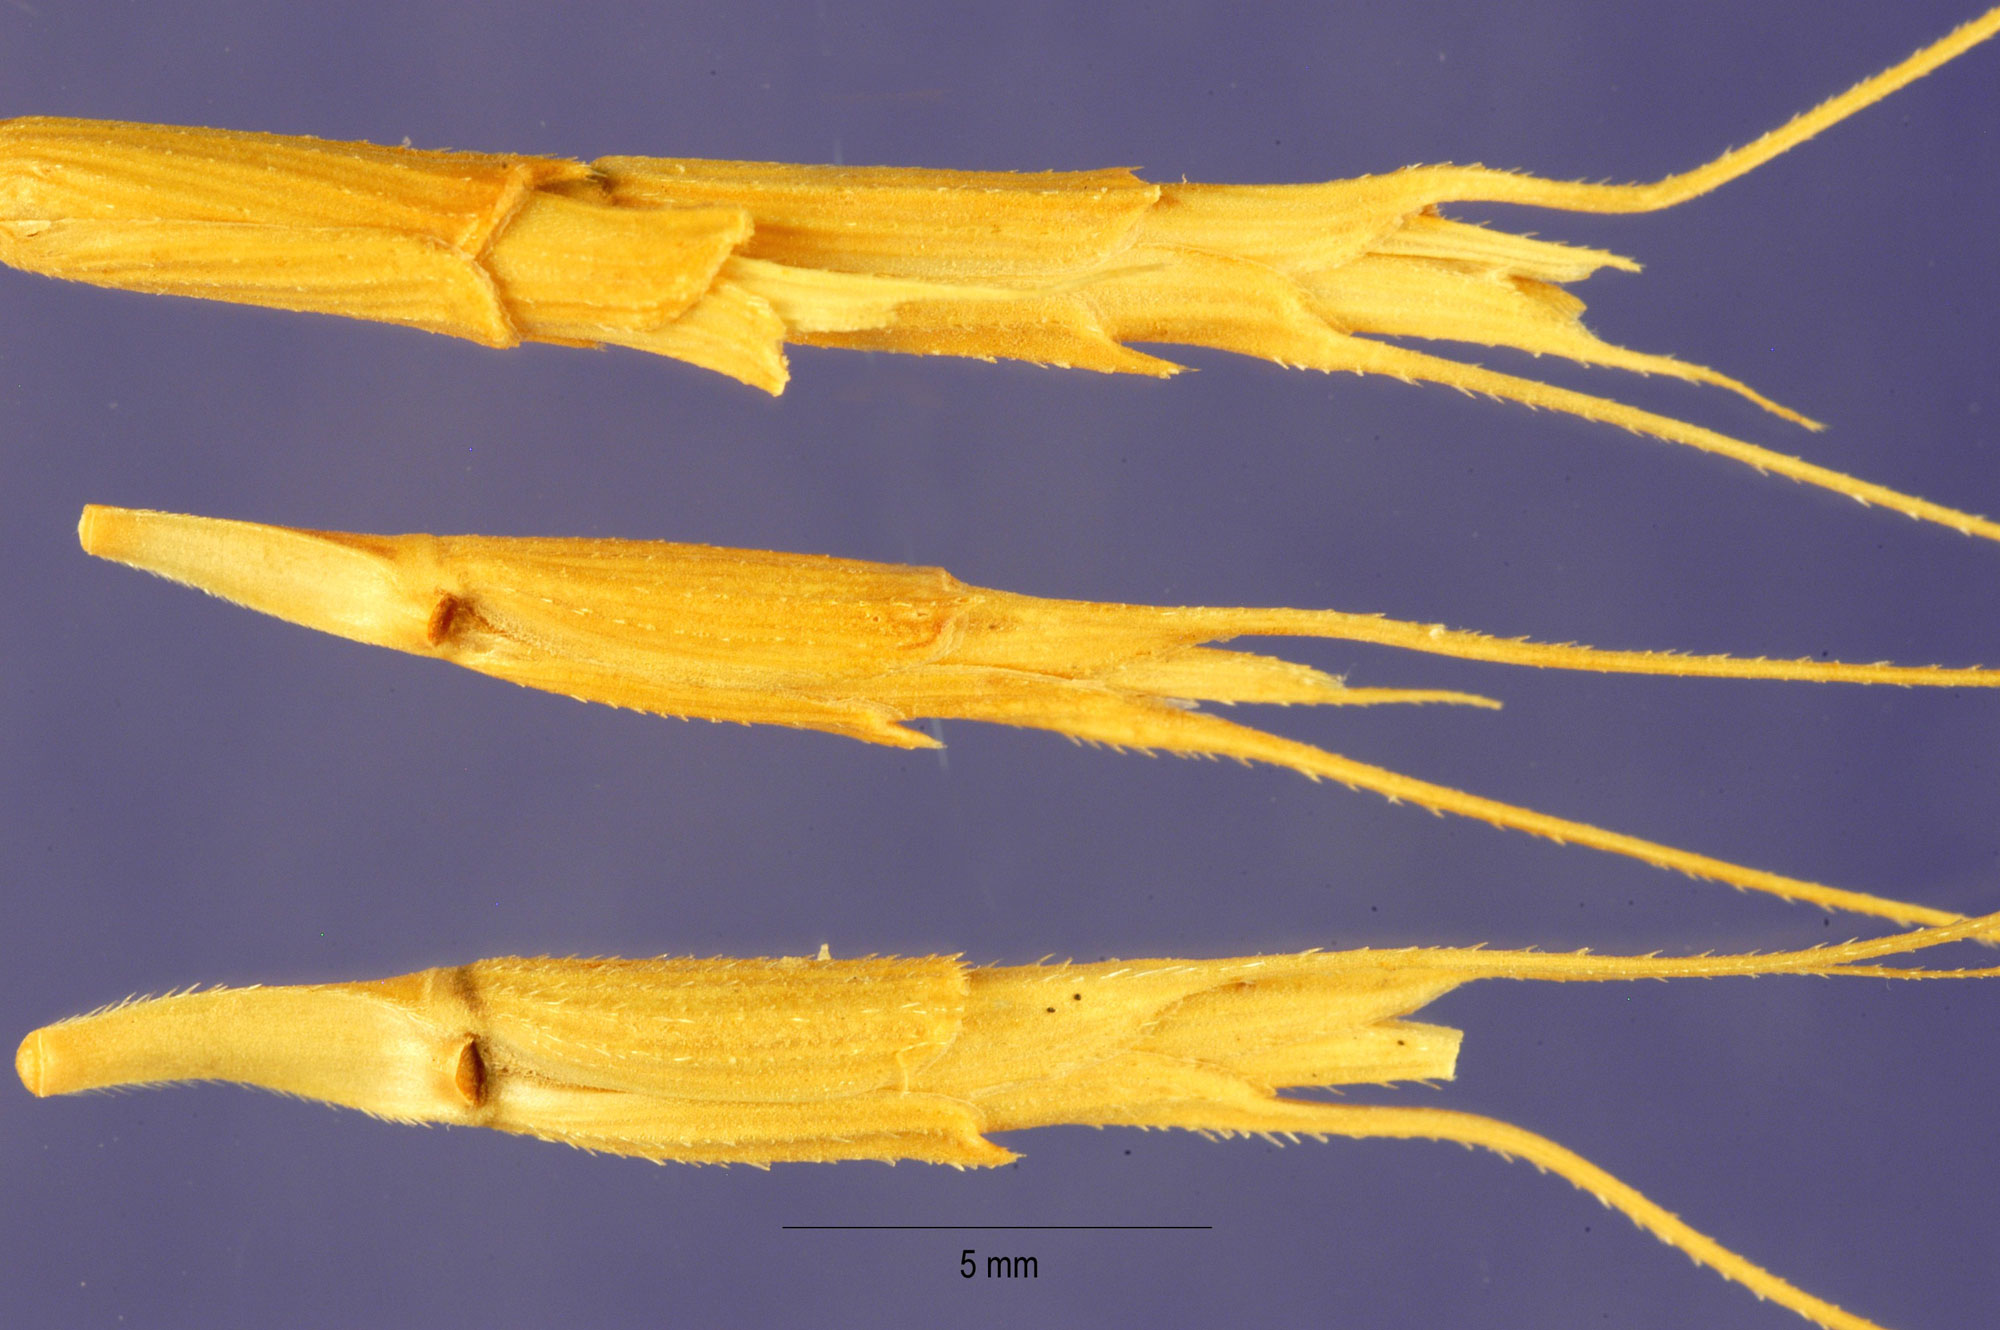 Photograph of spikelets from goatgrass, an ancestor of bread wheat. The photo shows thin dry spikelets with long awns.